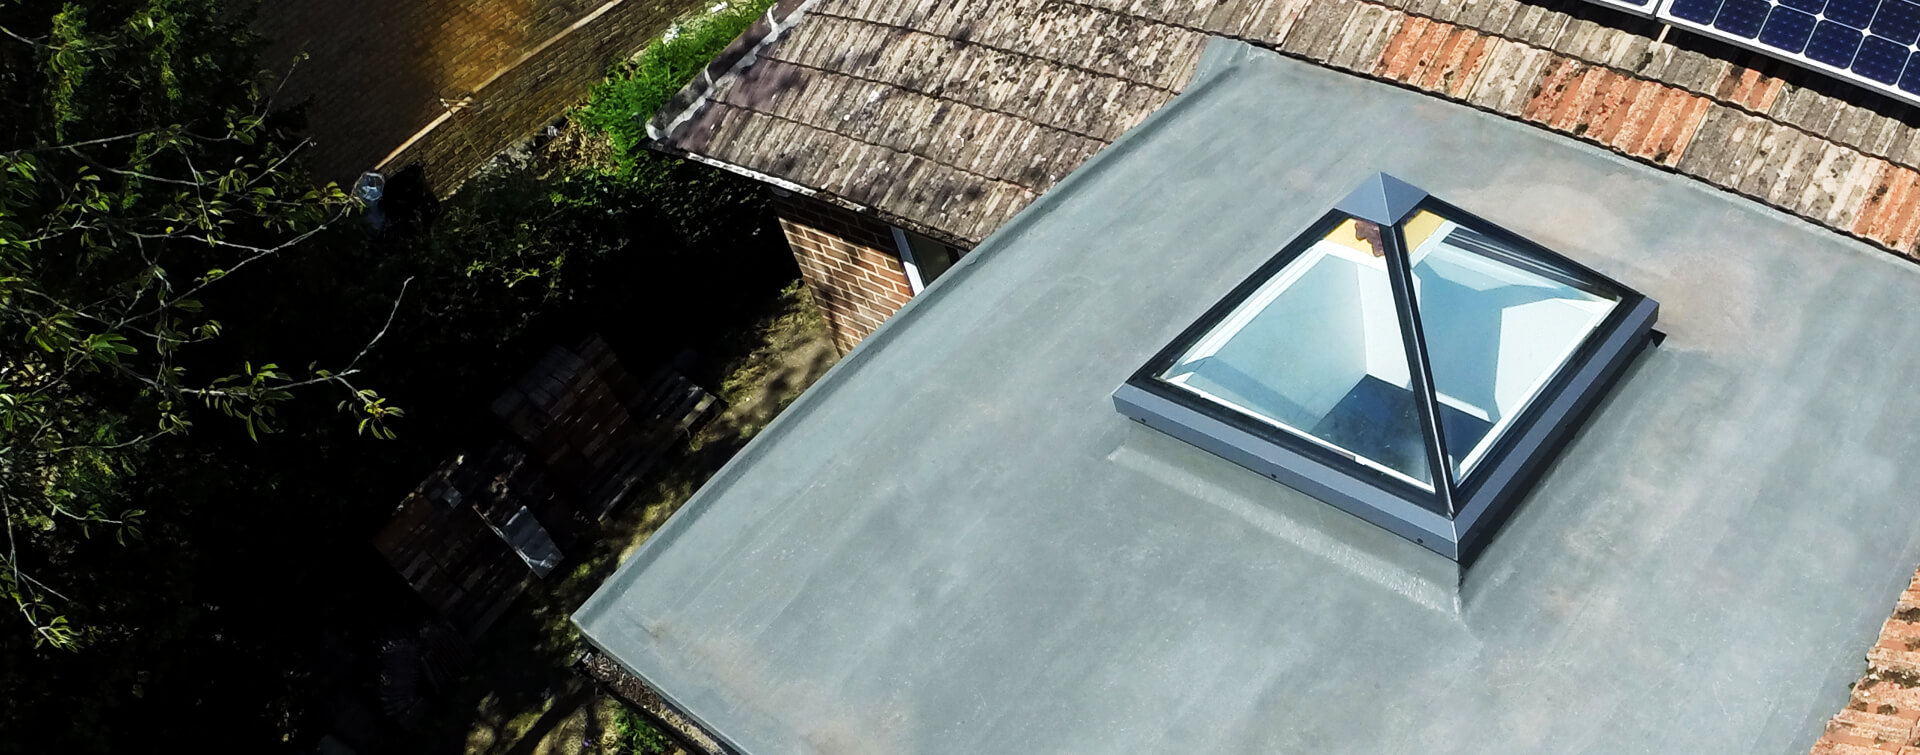 GRP Flat Roofs, Rubber Roofing. and Fibreglass Flat Roofs of a home in Worcestershire